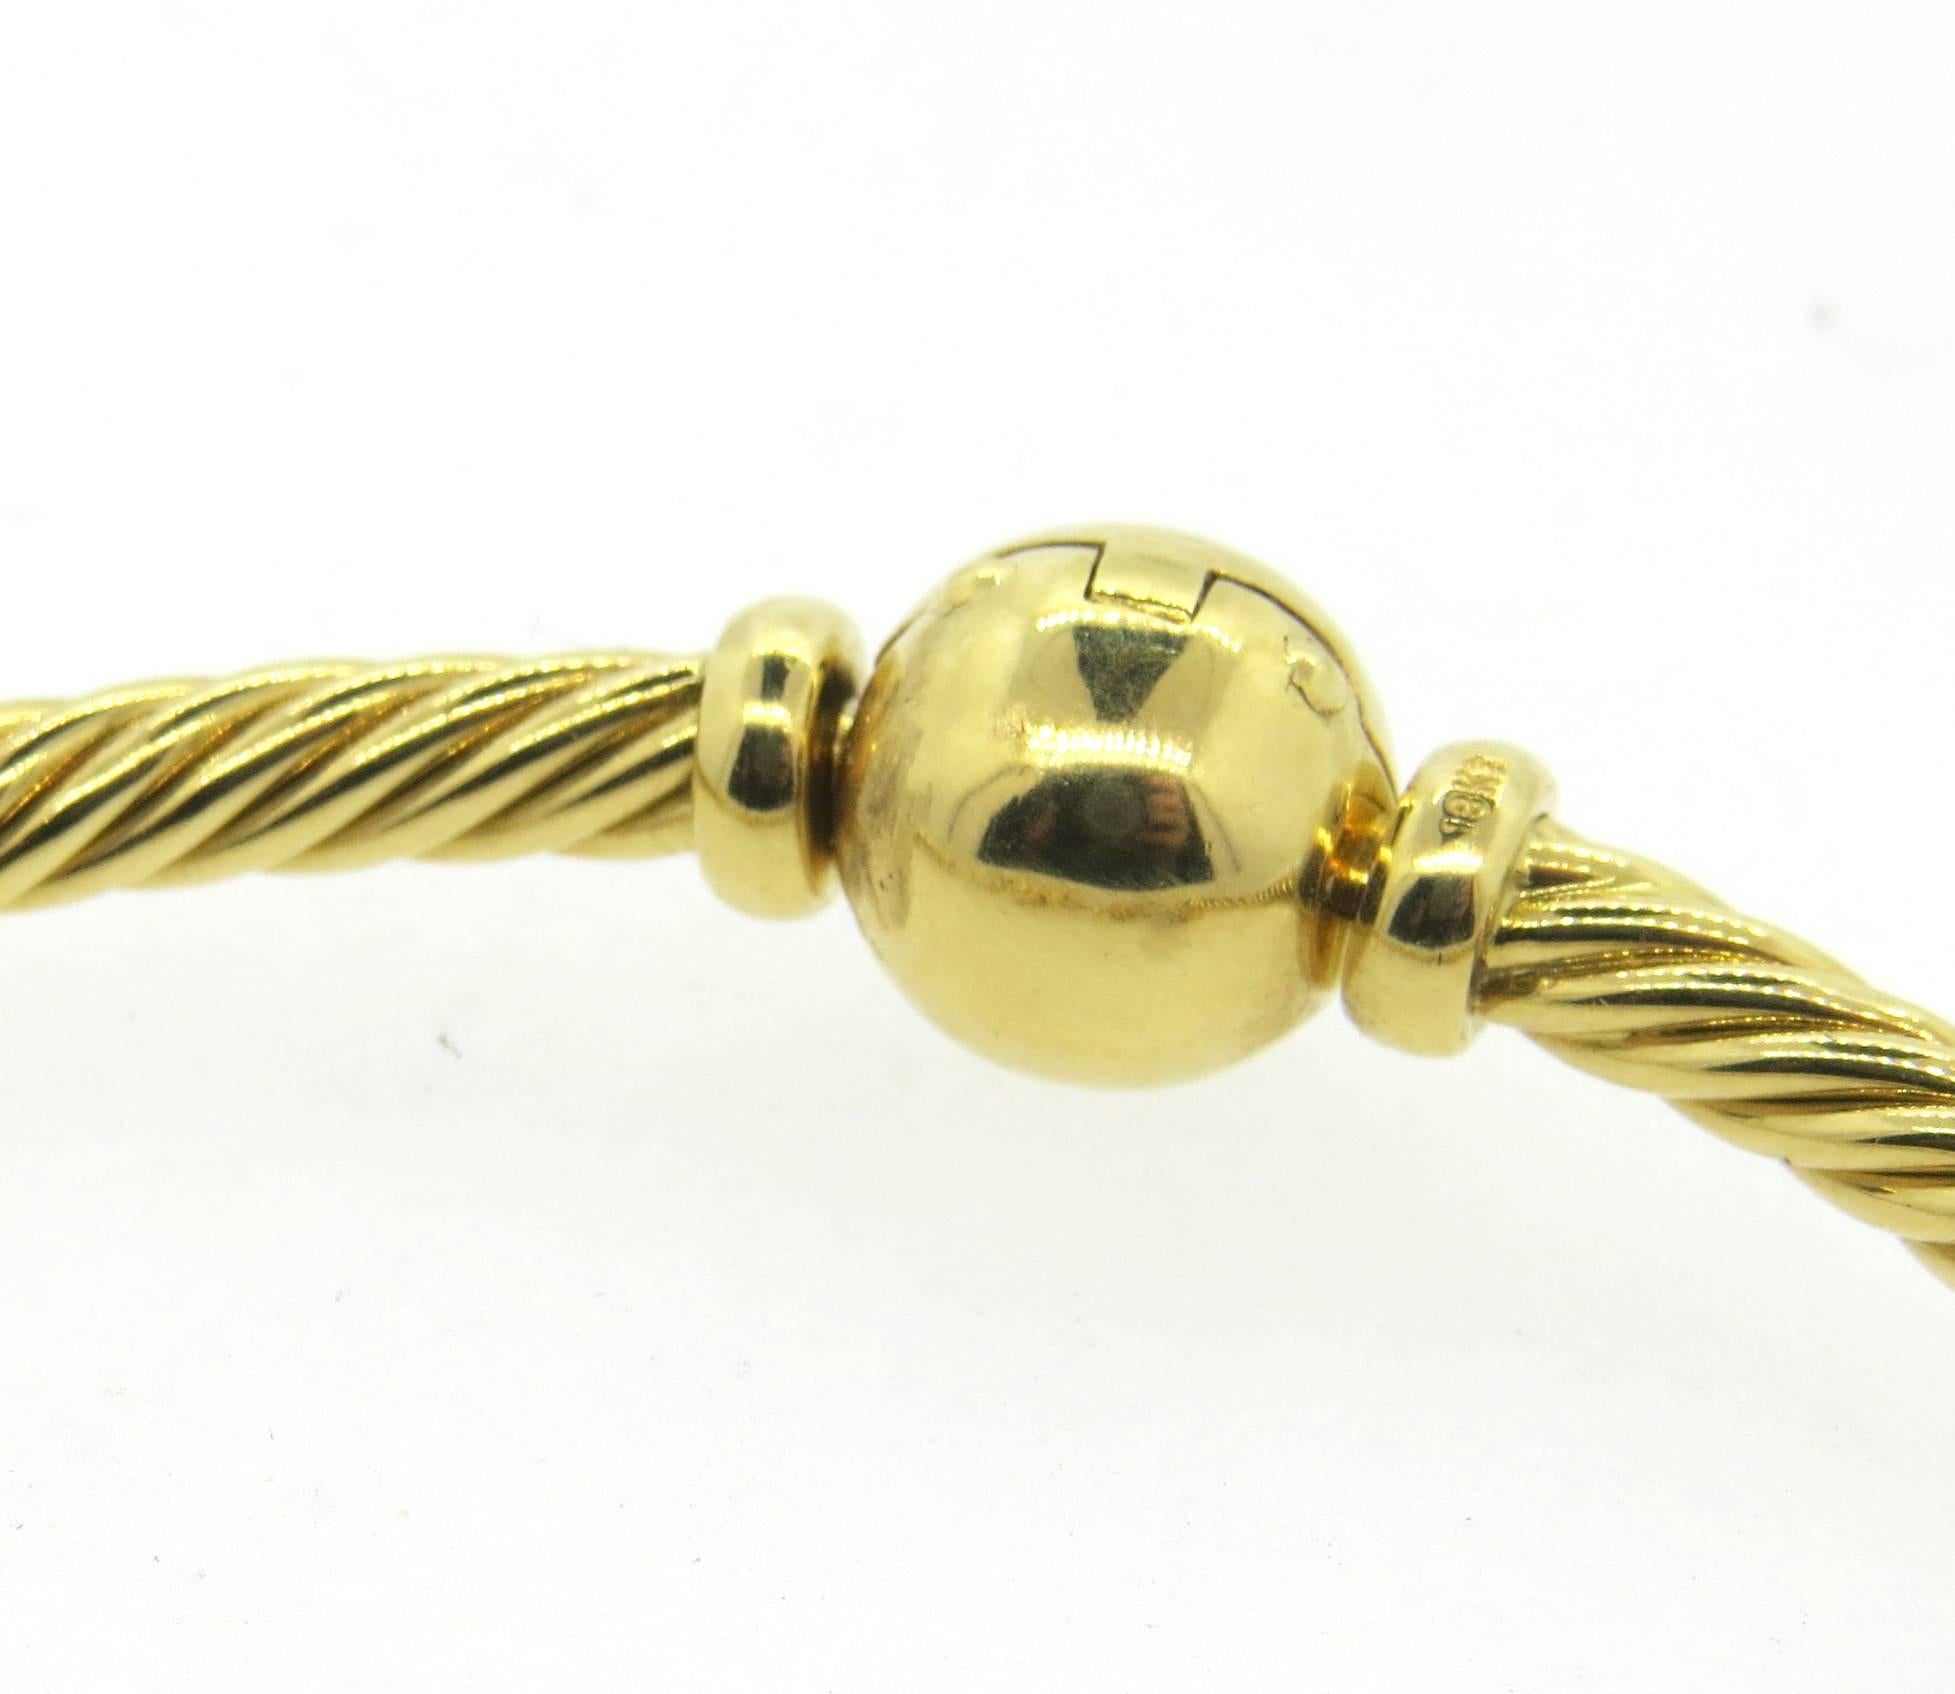 18k yellow gold bracelet, crafted by Pomellato, featuring five Orsetto charms. Bracelet is 6 1/2